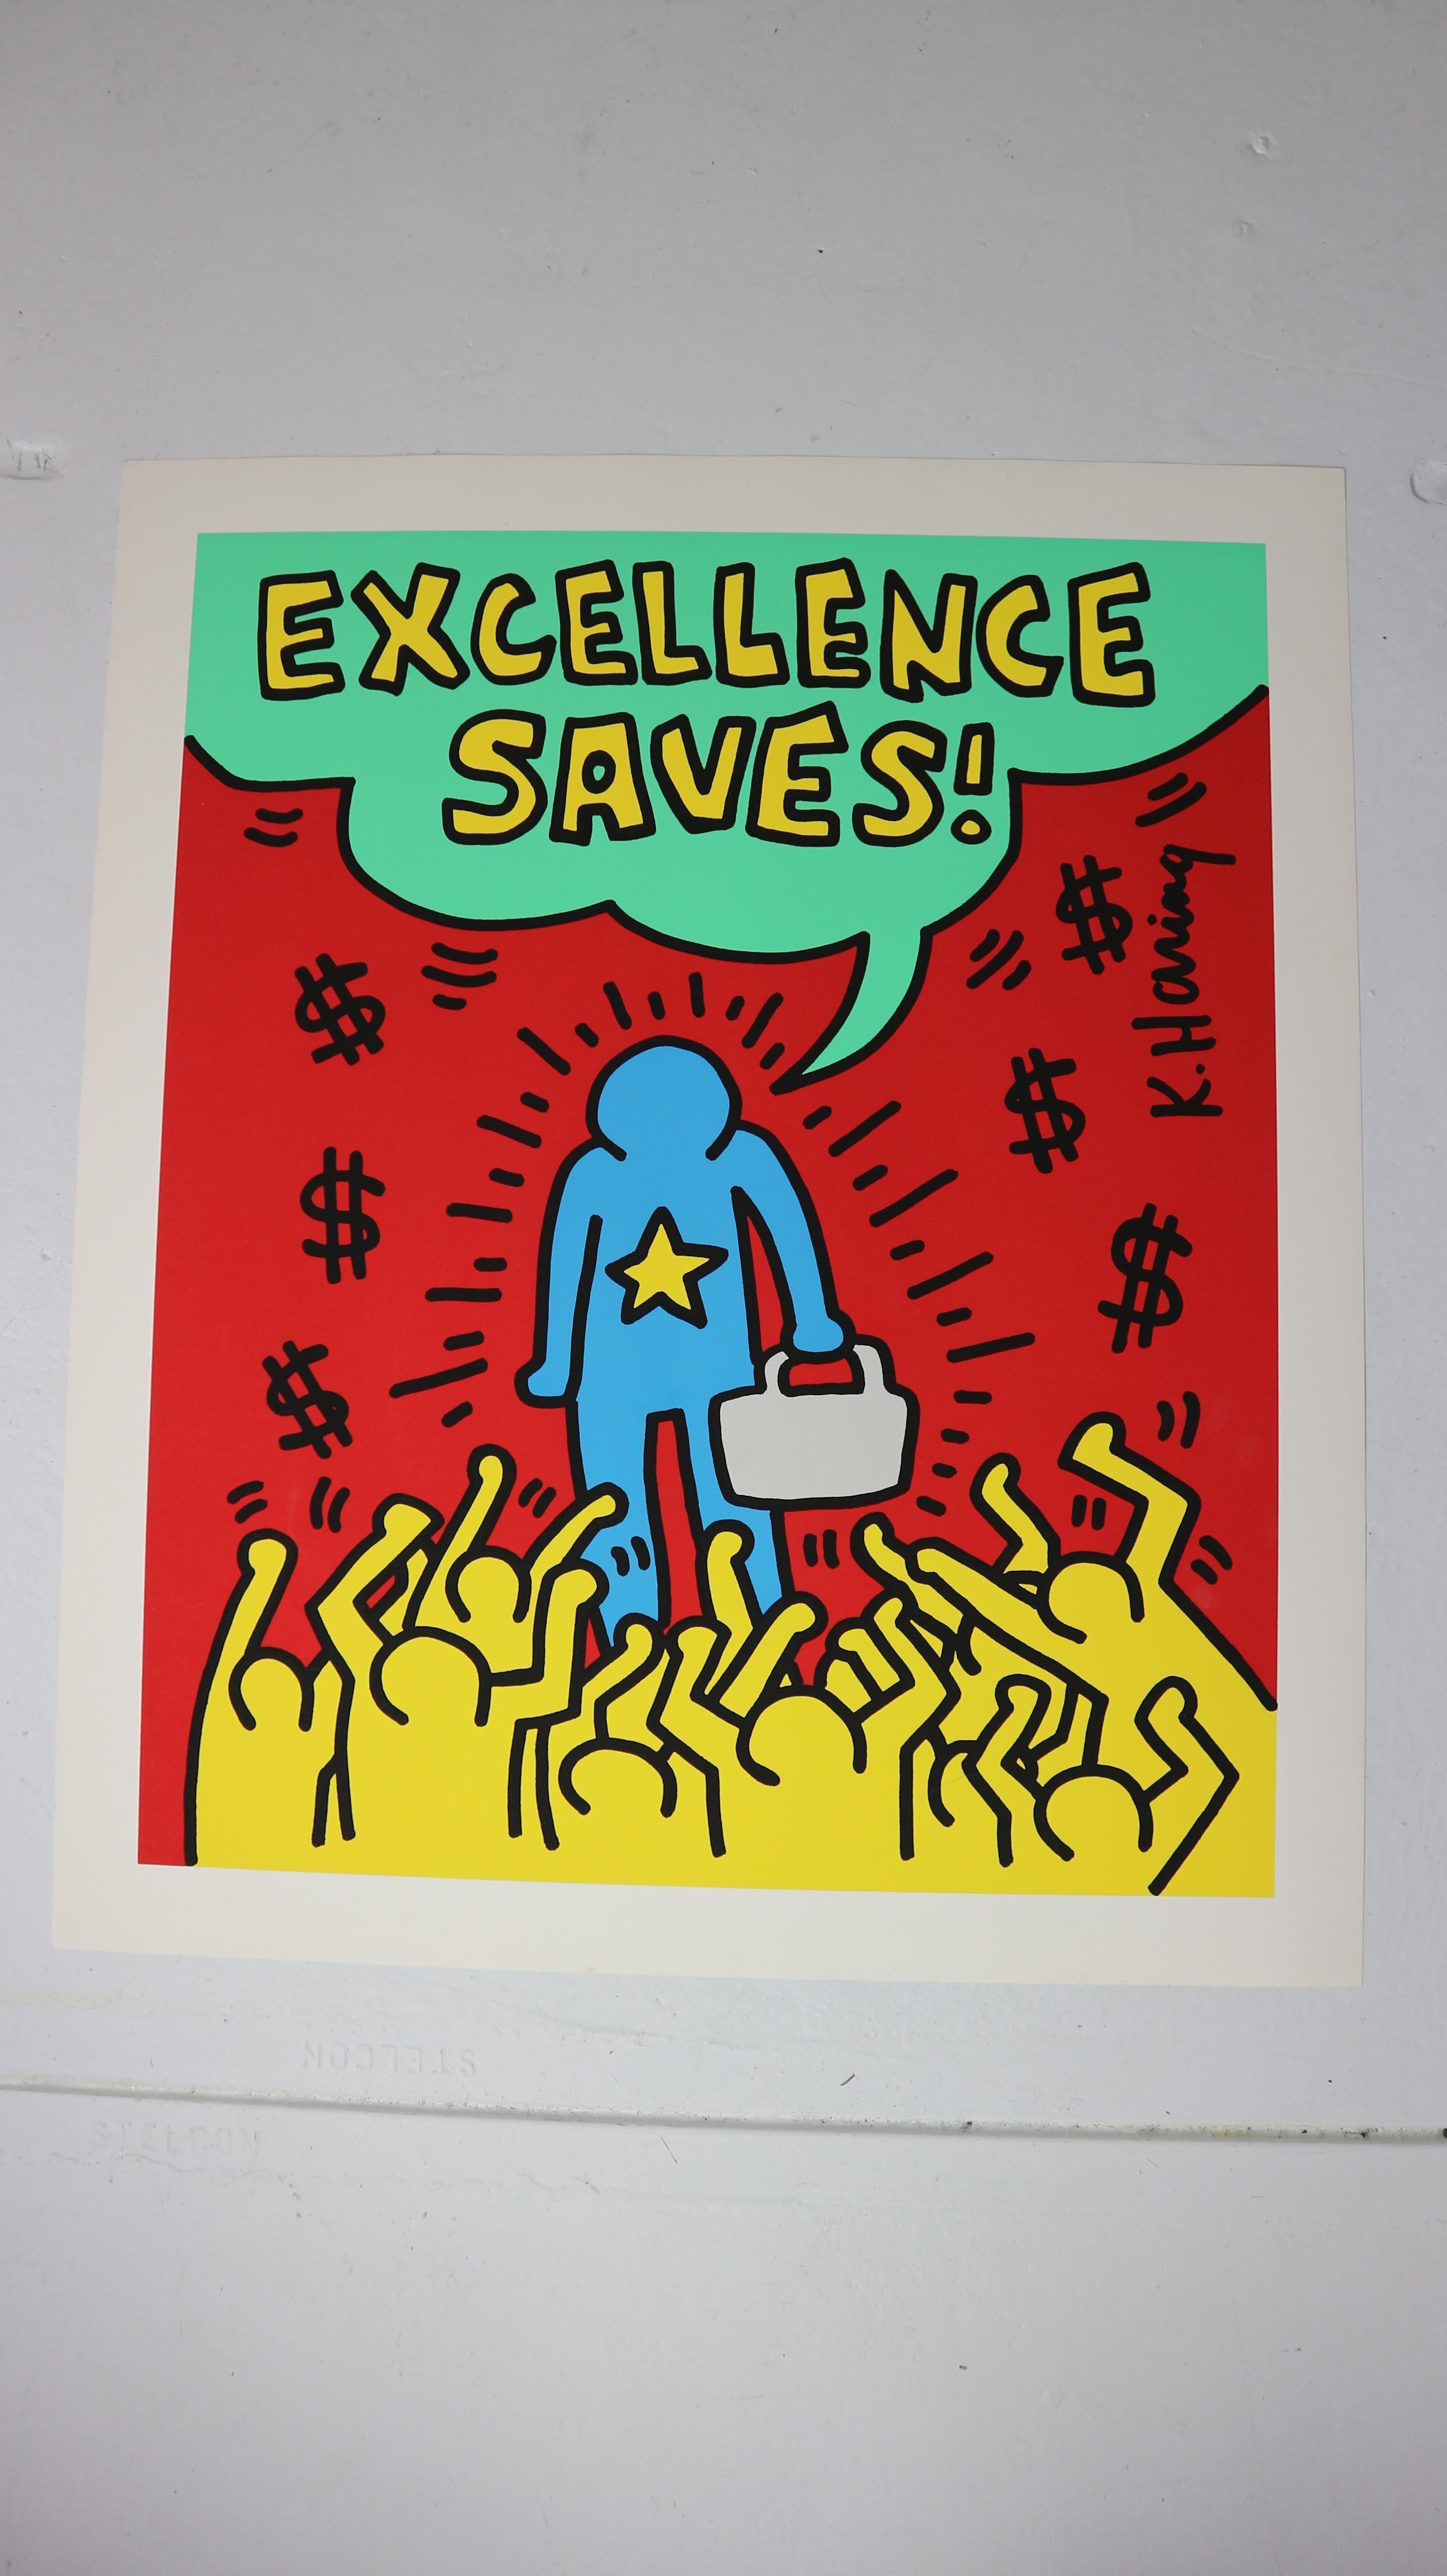 Keith Haring, an American pop art artist (1958-1990)
Title: Playboy 3 (Excellence saves)
Published by Special edition Ltd. for Playboy
Year: 1990
Silkscreen
Poster size: (91.44cm x 76.2cm).
 